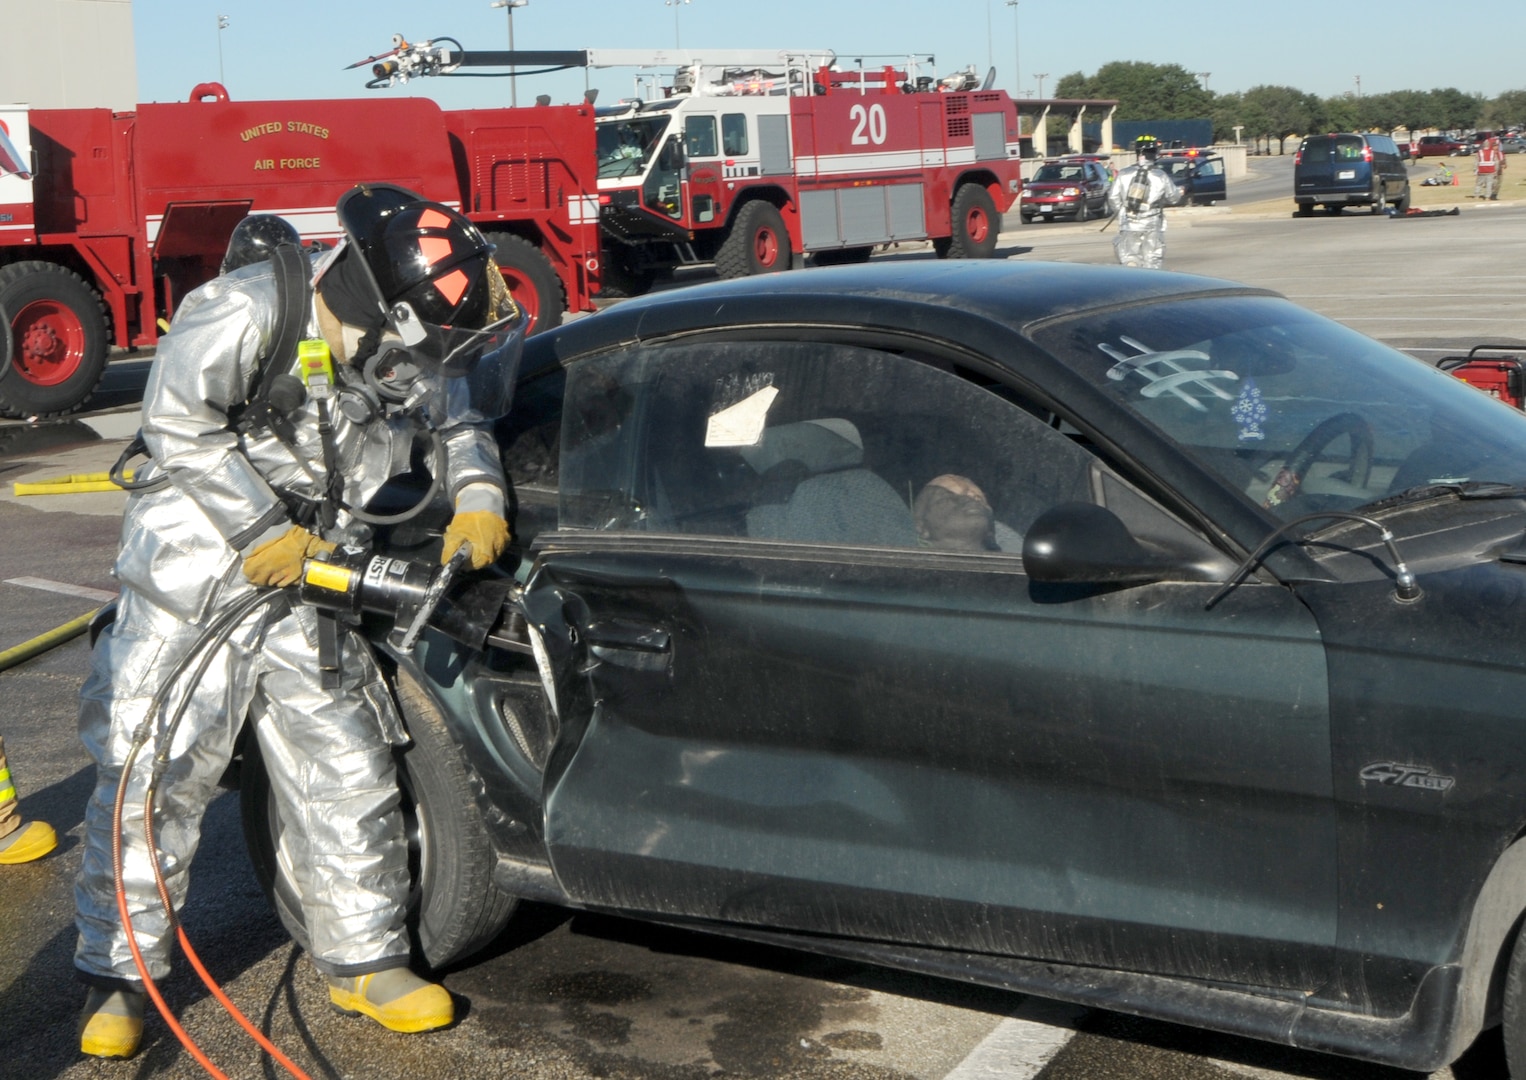 A firefighter uses the "jaws of life" to free a simulated victim during the exercise portion of the 2008 Operational Readiness Inspection at Randolph Air Force Base, Texas. (U.S. Air Force photo by Steve White)